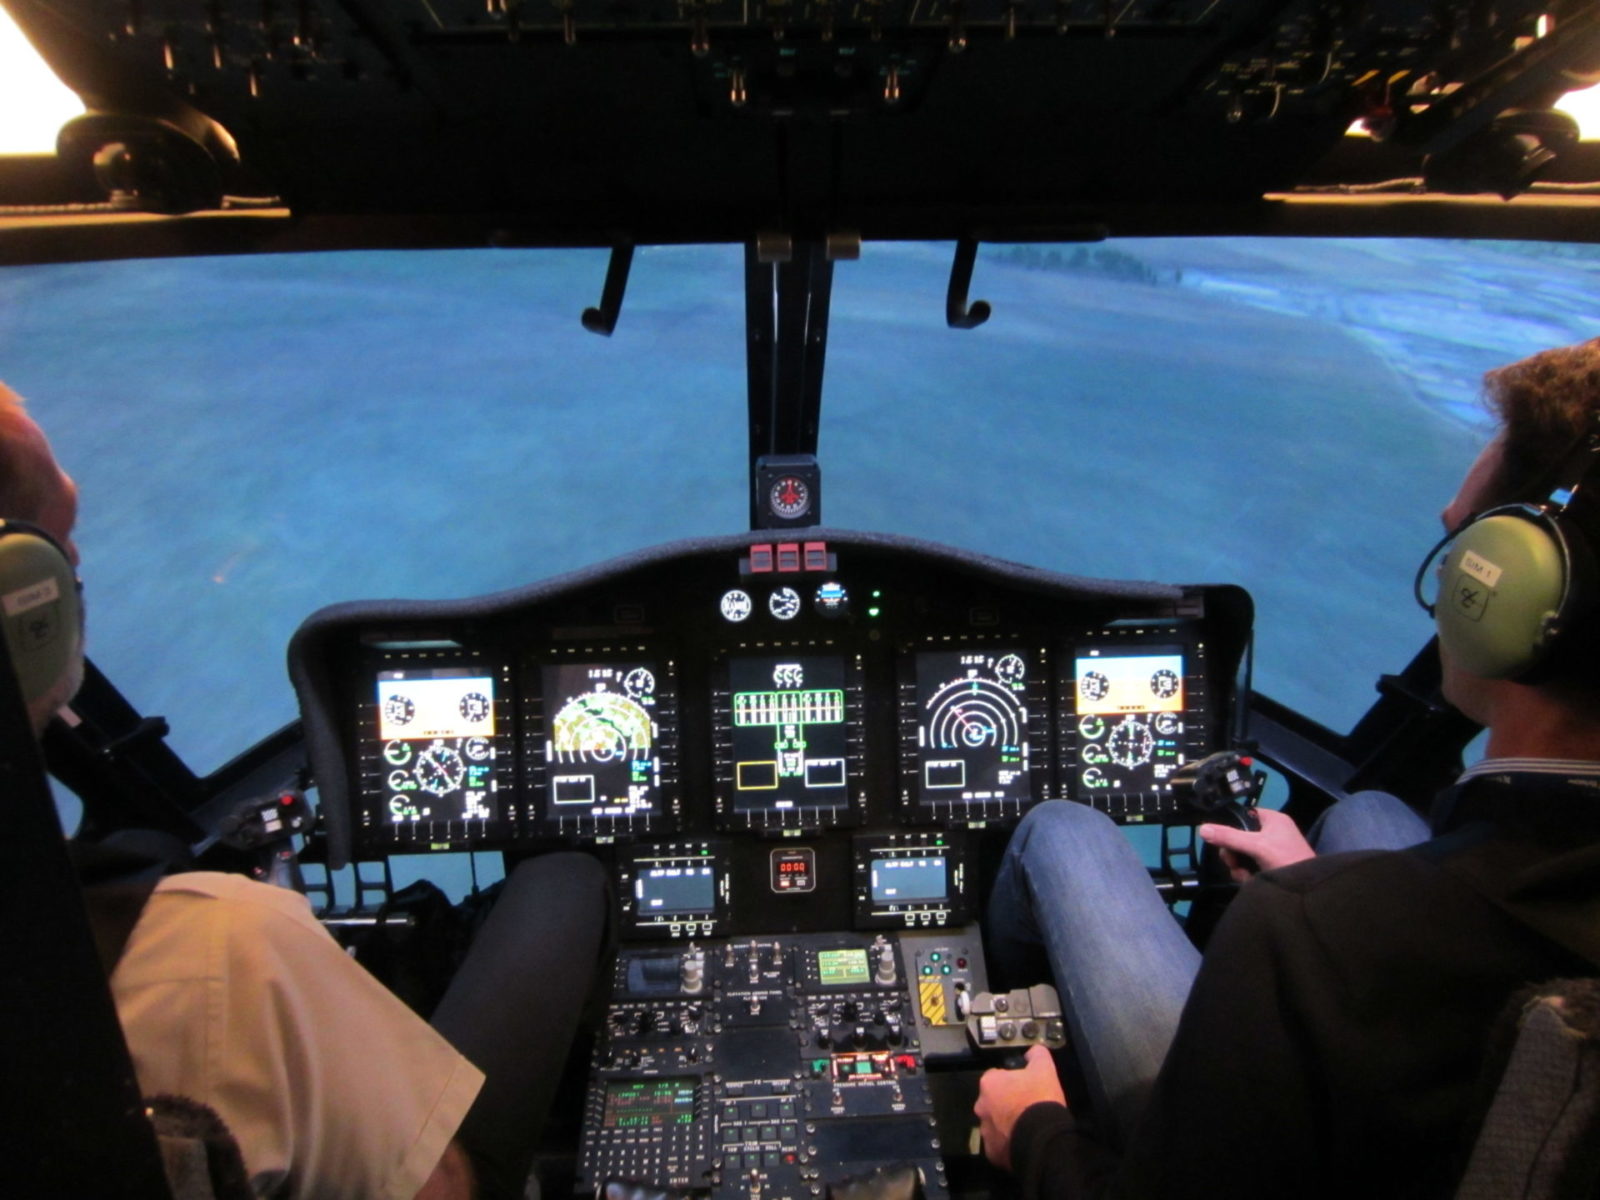 B787 Simulator at International Tactical Training Centre cockpit with 2 pilots